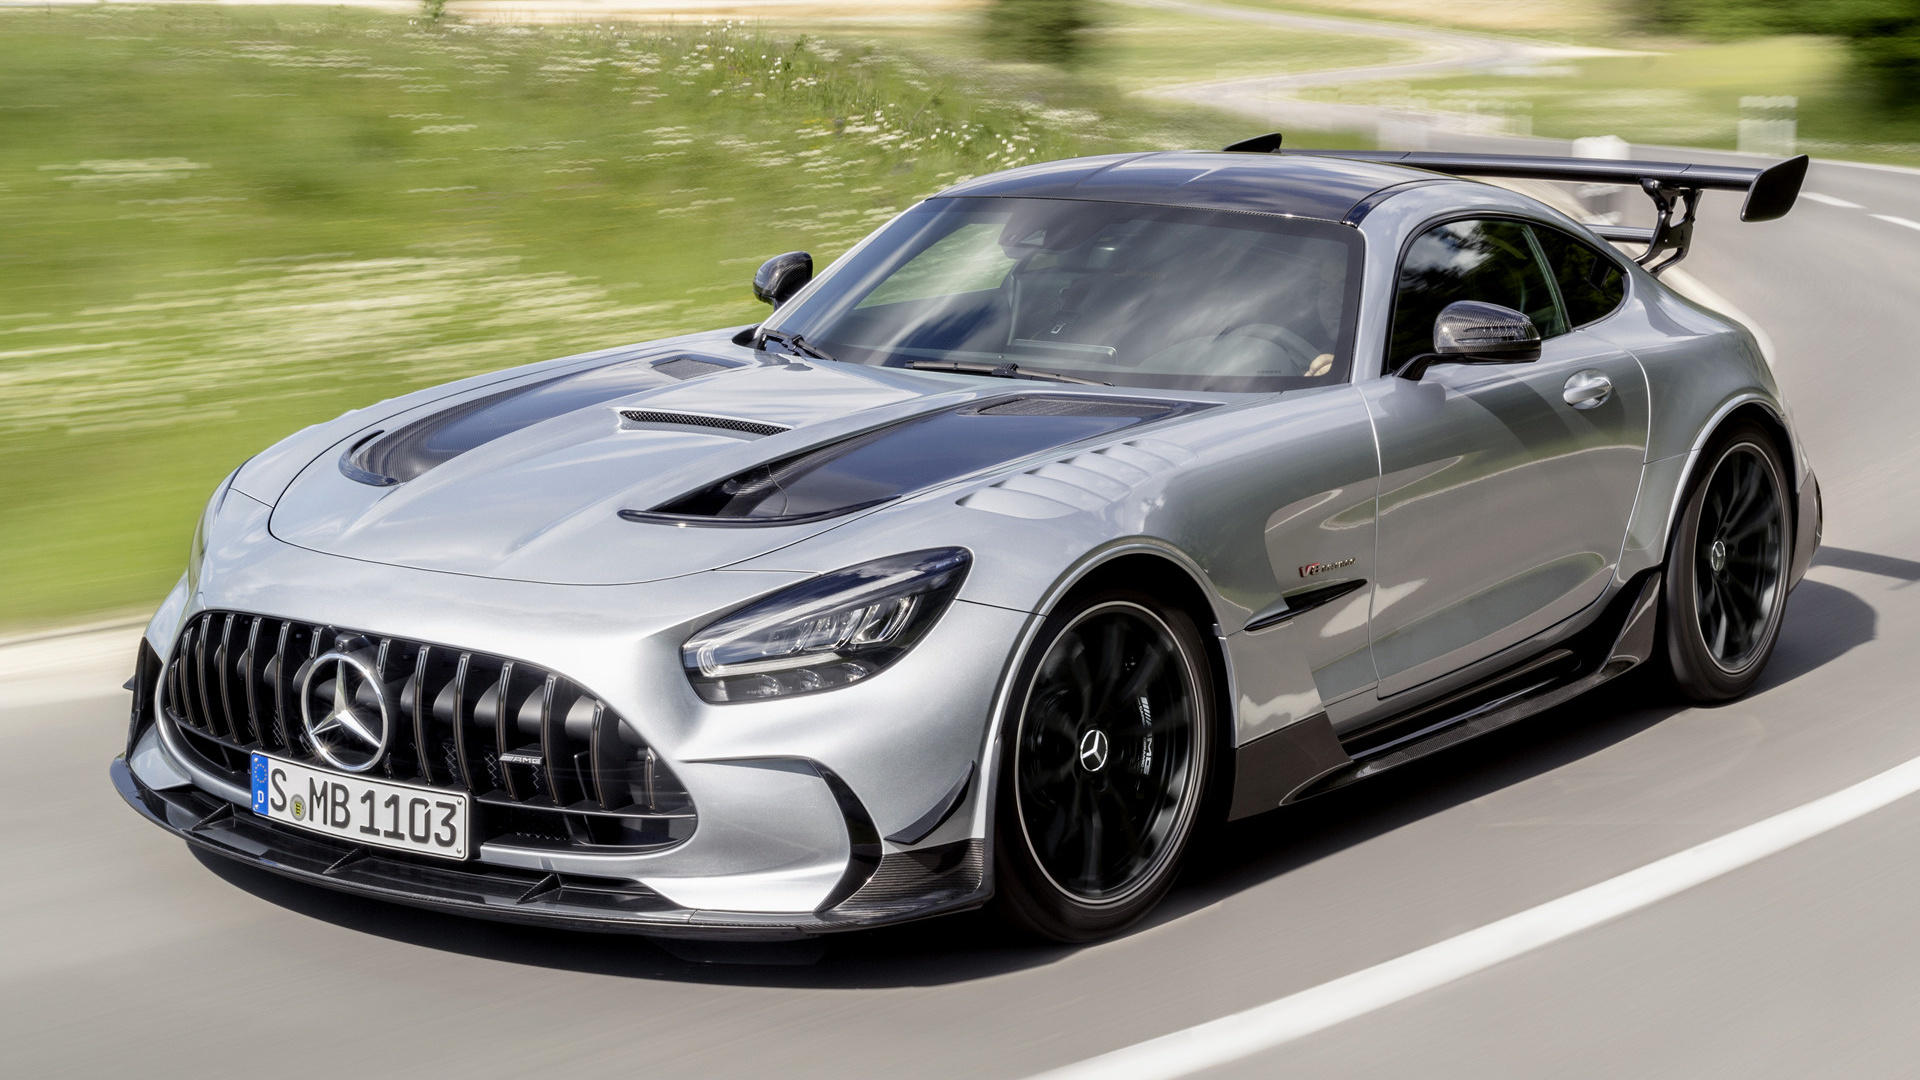 2020 Mercedes-AMG GT Black Series - Wallpapers and HD Images | Car Pixel